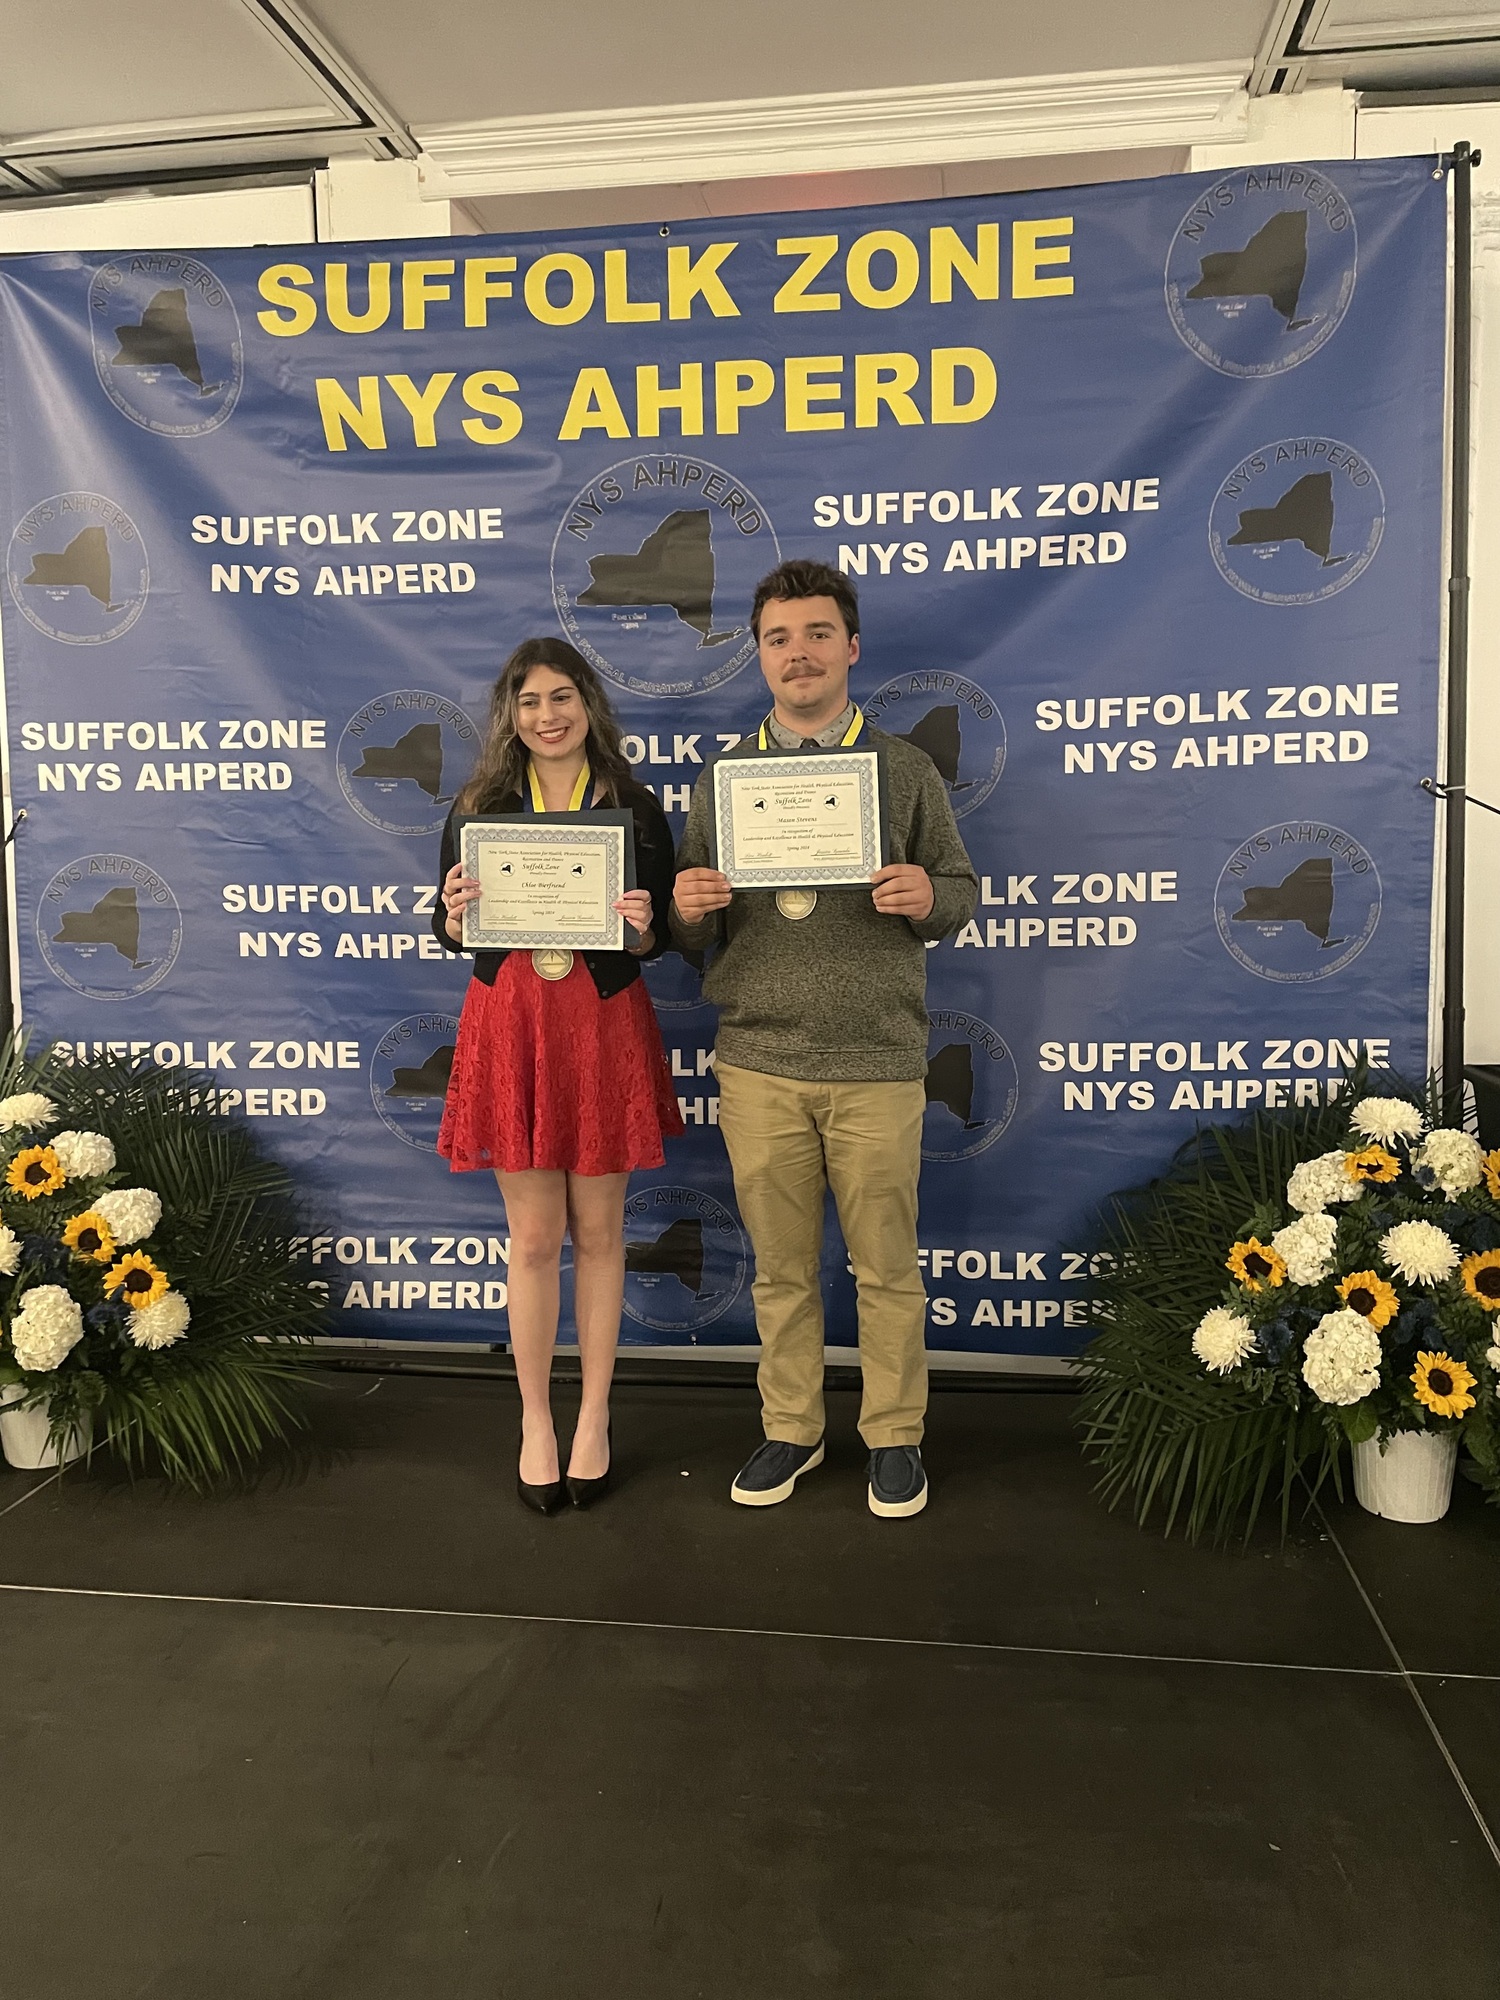 Southampton High School Mariners Chloe Bierfriend and Mason Stevens were recently honored by the New York State Association for Health, Physical Education, Recreation and Dance as winners of the Suffolk Zone Student Leadership Award. The seniors were selected based on their excellence in physical education, leadership ability and service to the community. COURTESY SOUTHAMPTON SCHOOL DISTRICT